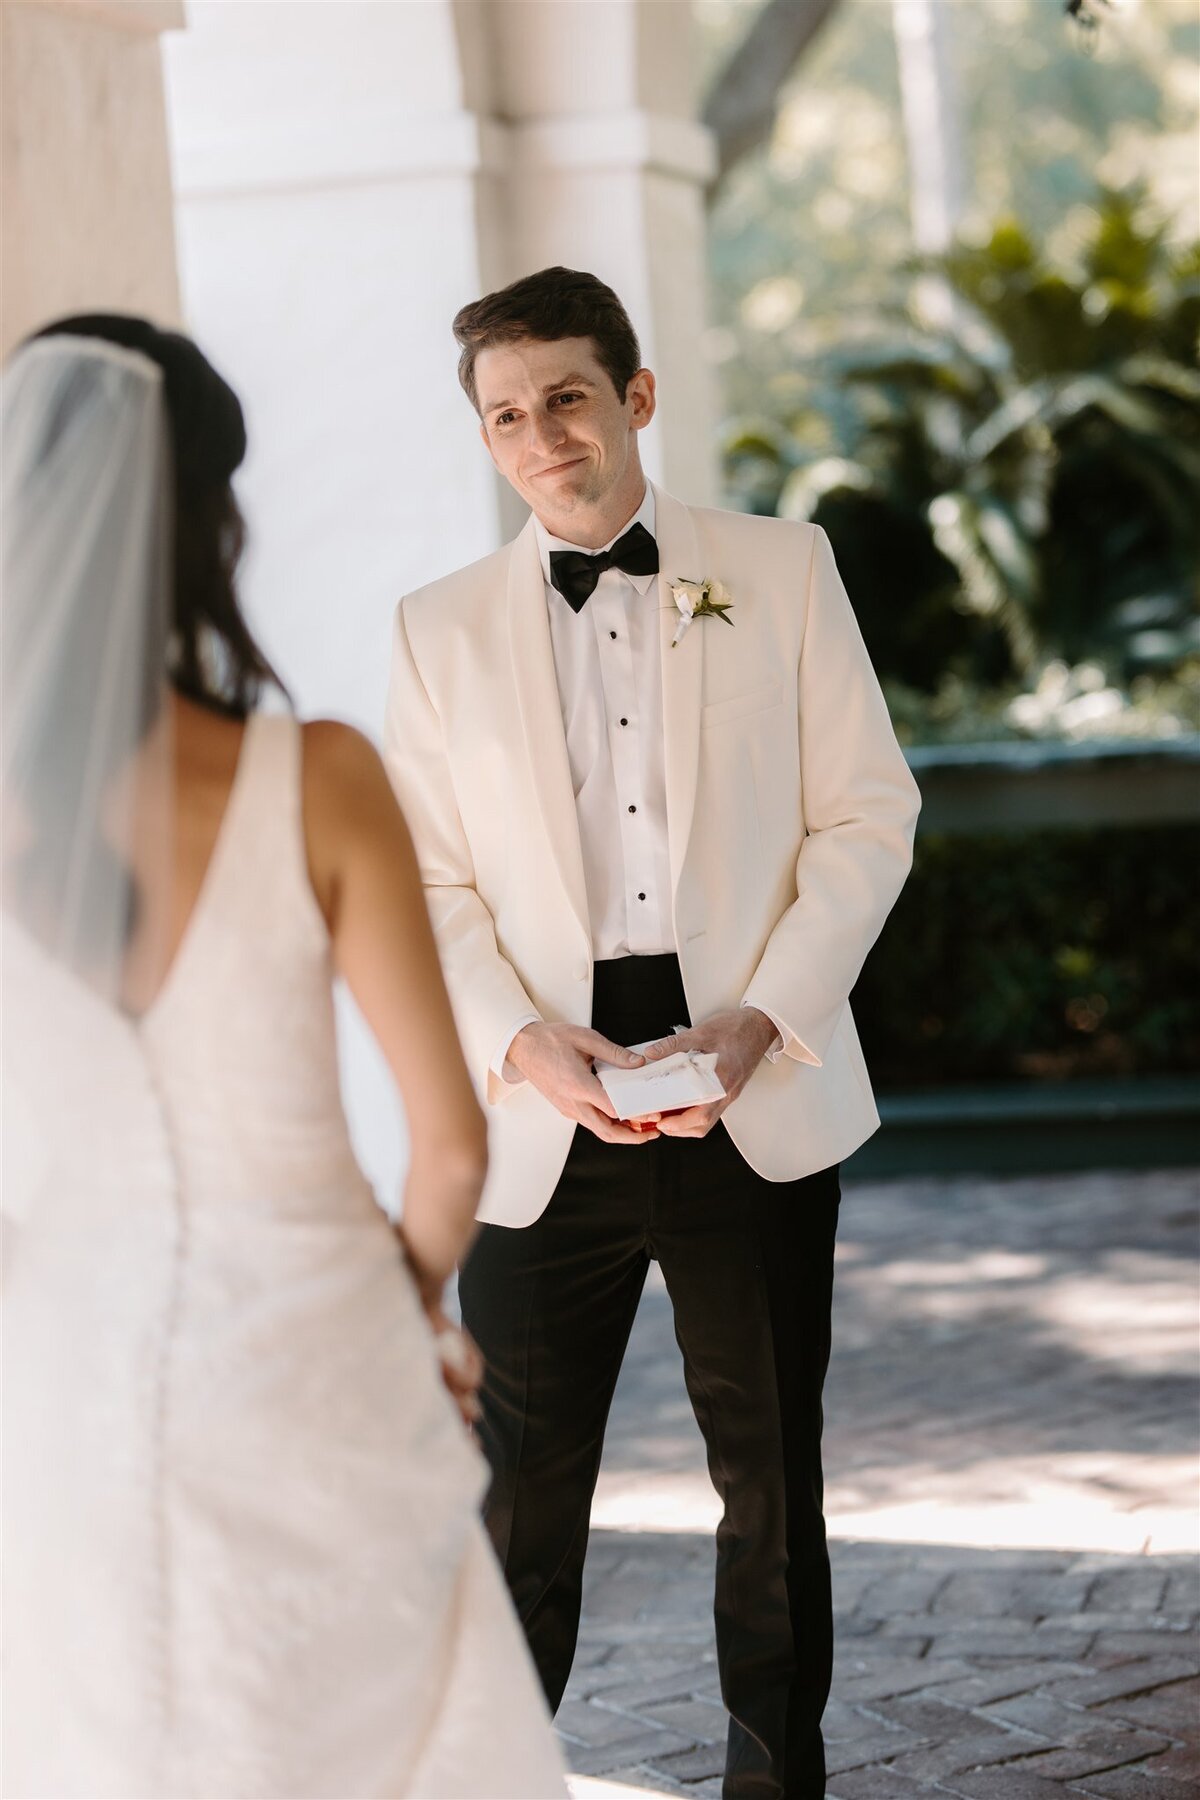 grooms first look at bride on wedding day